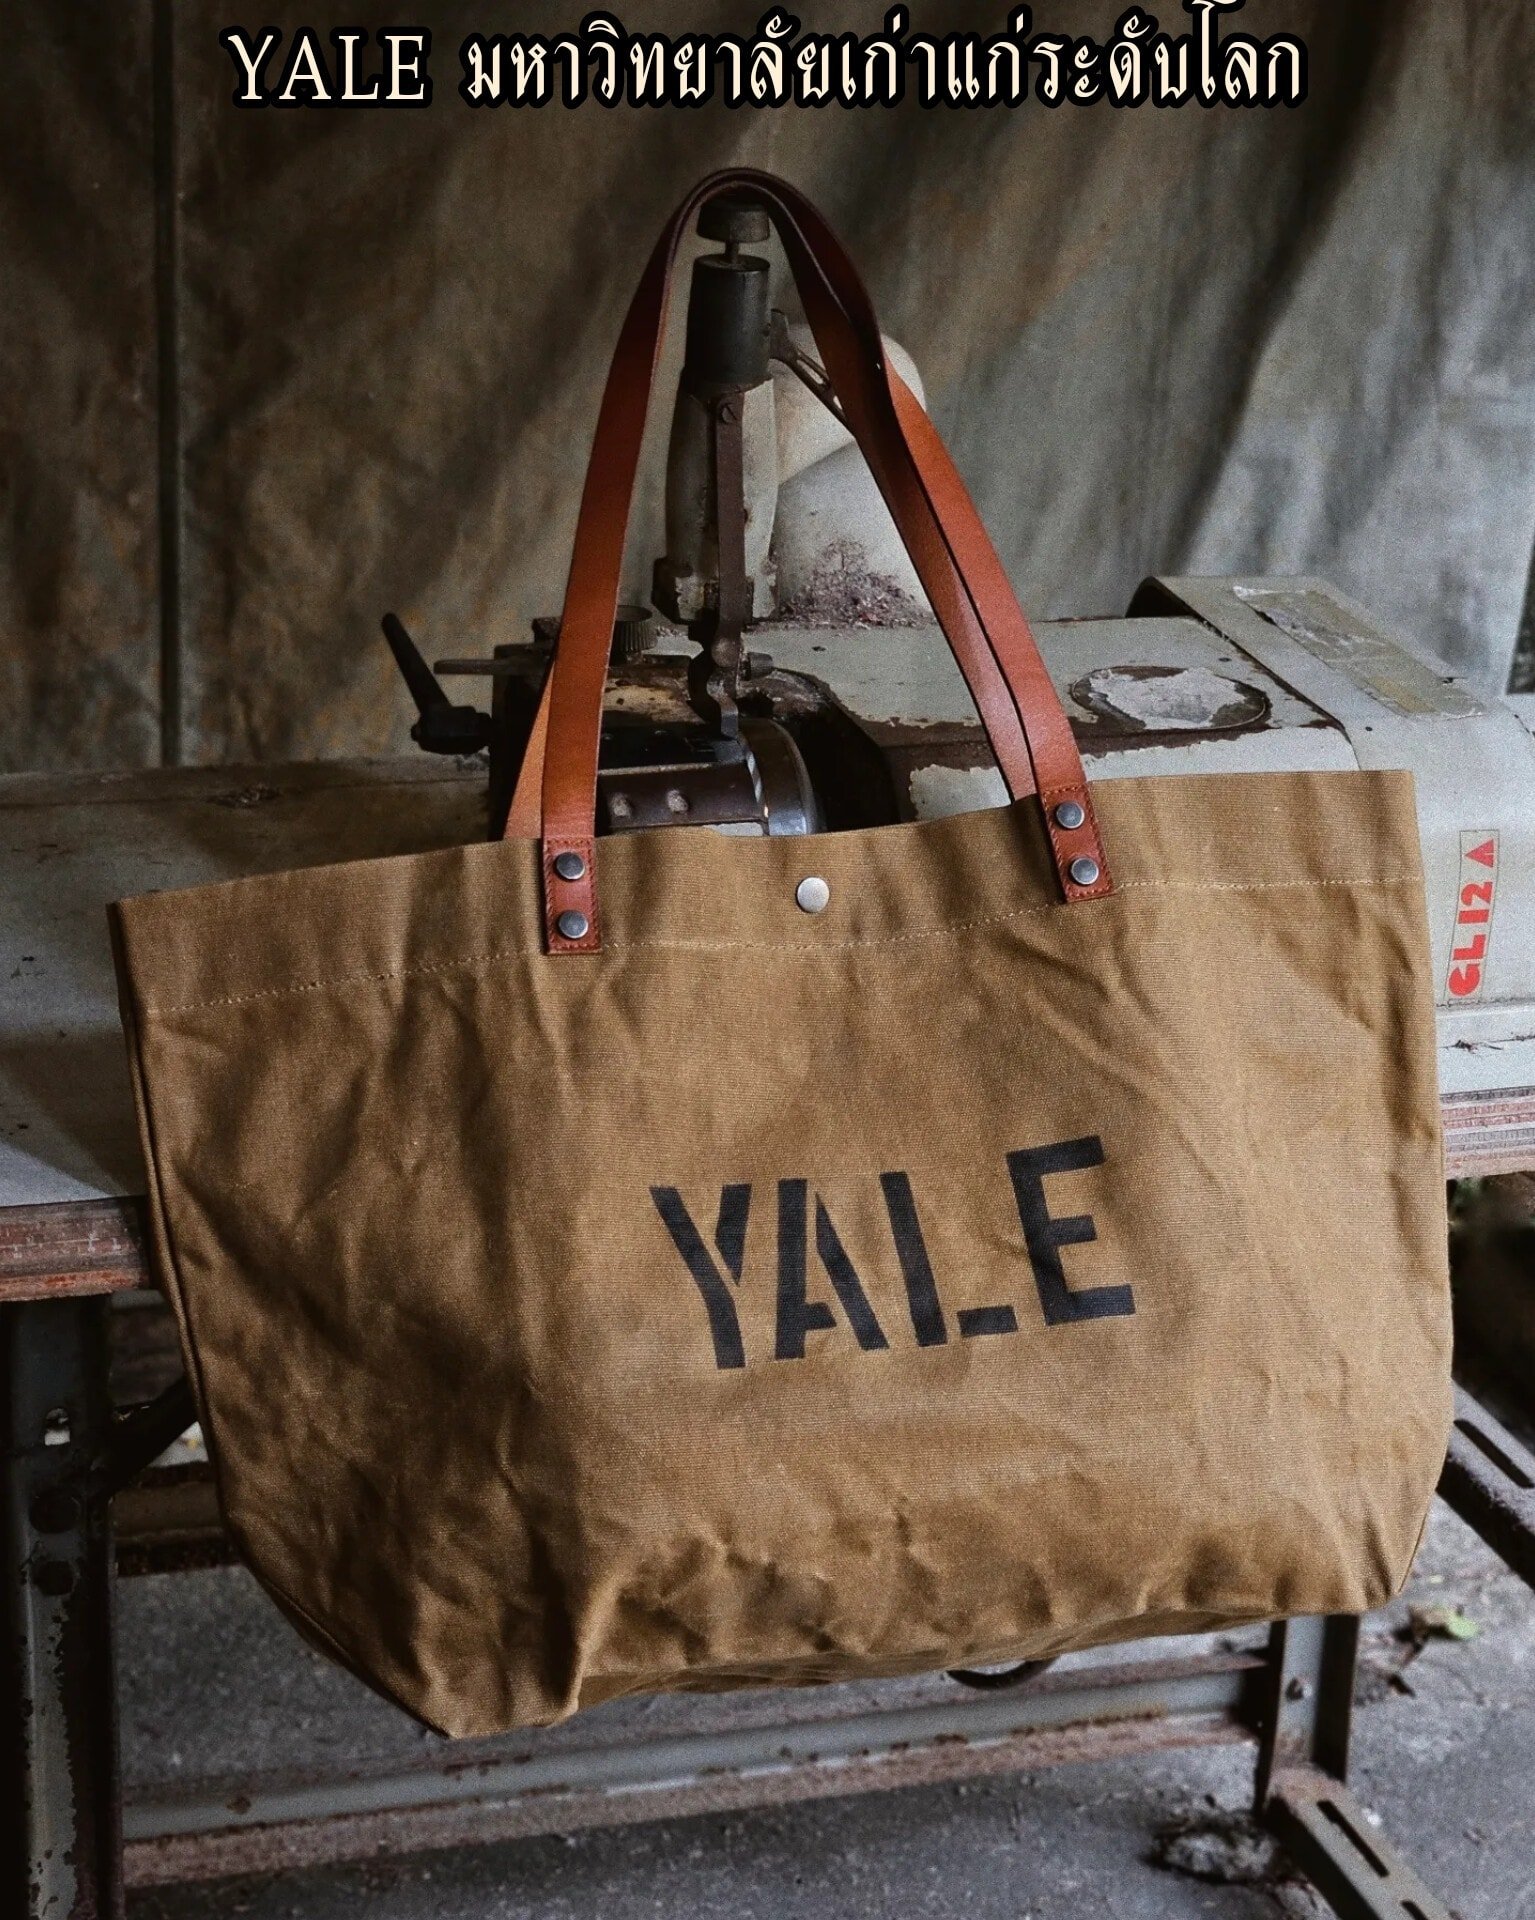 VALLEY-YALE (brown)